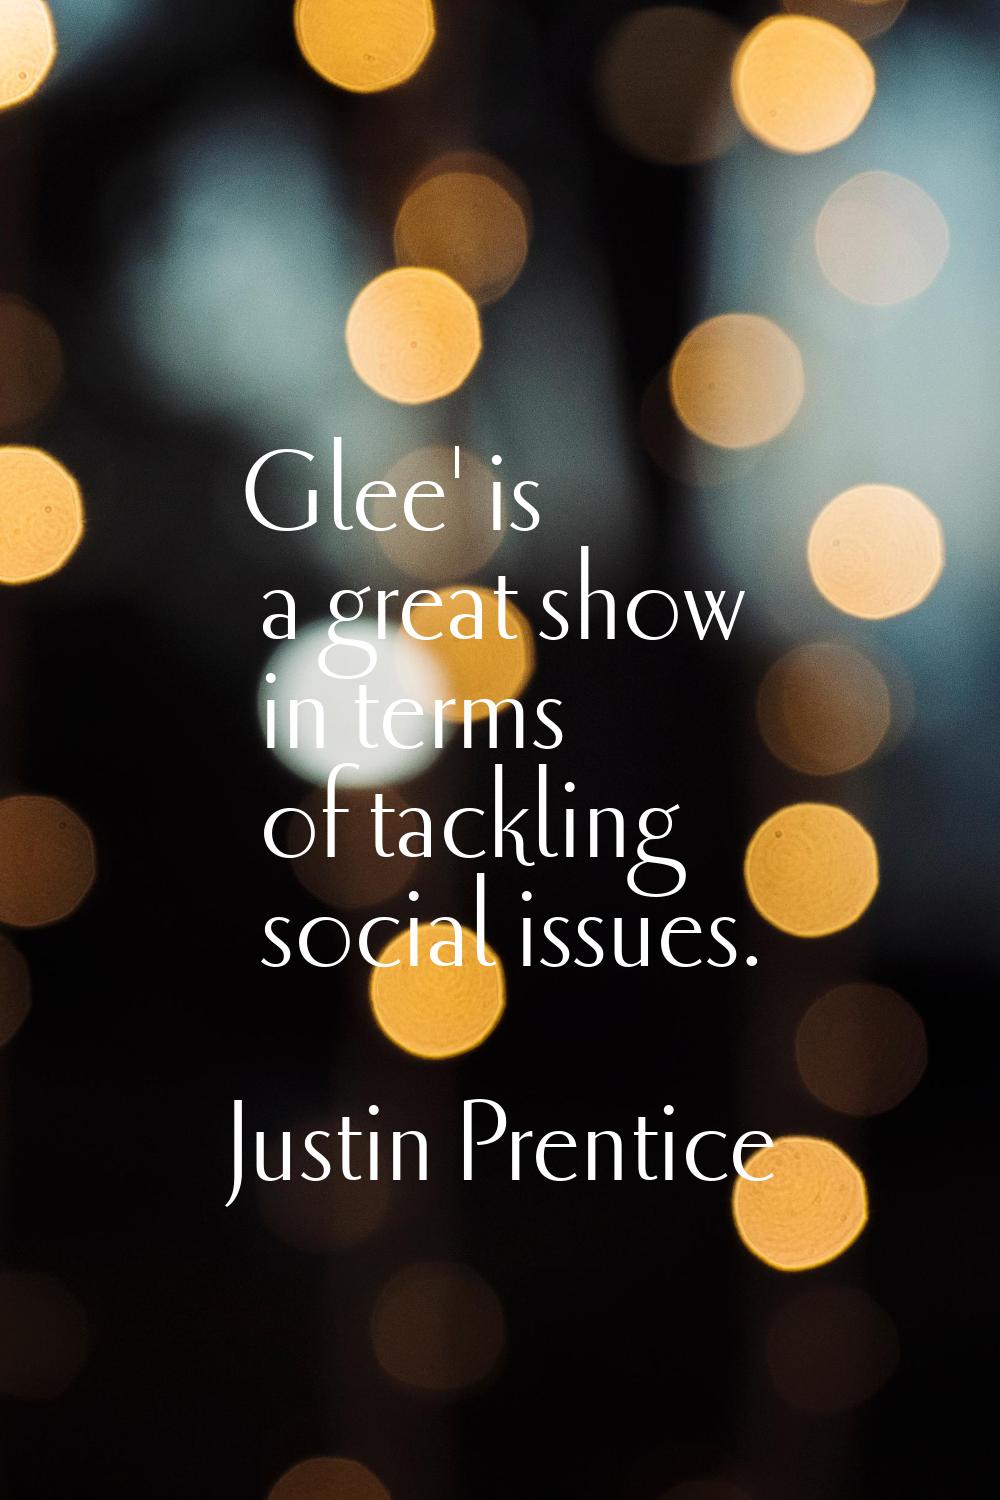 Glee' is a great show in terms of tackling social issues.